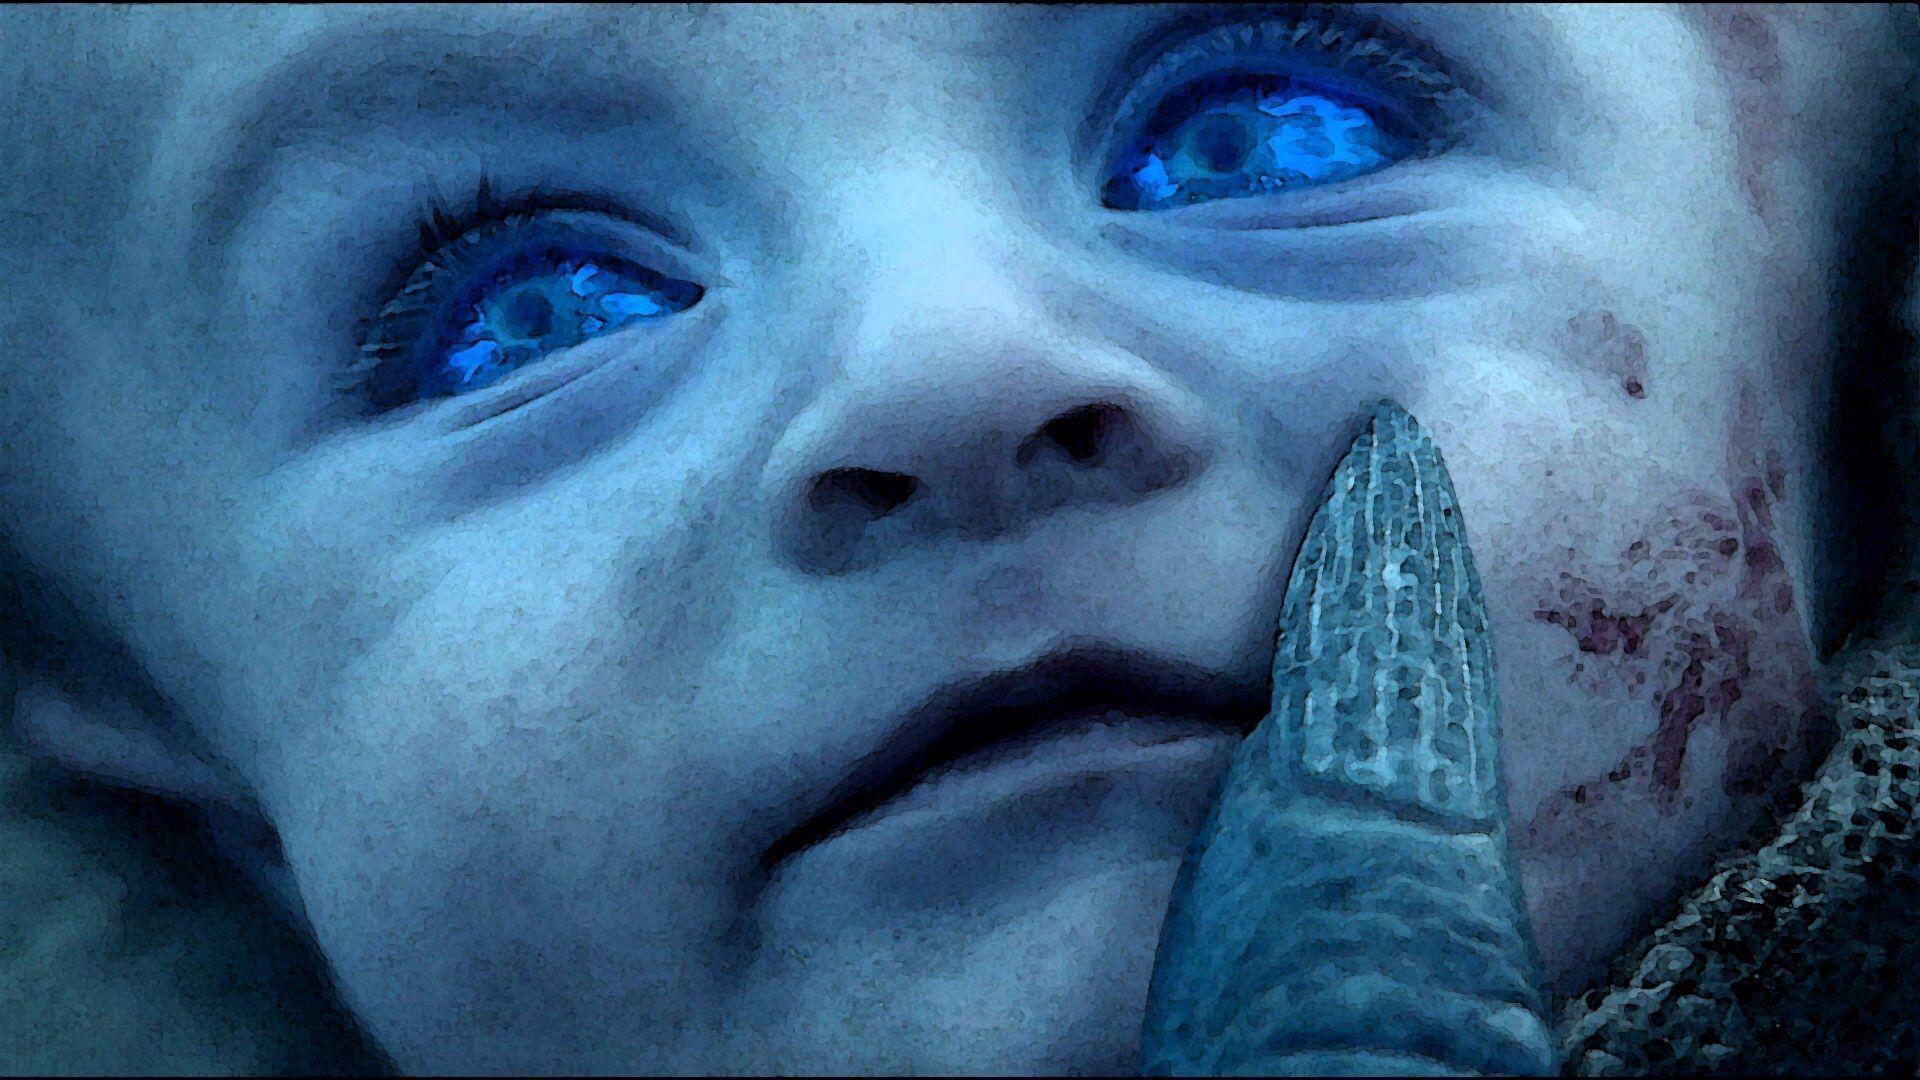 Game of Thrones ending. Night King and the baby